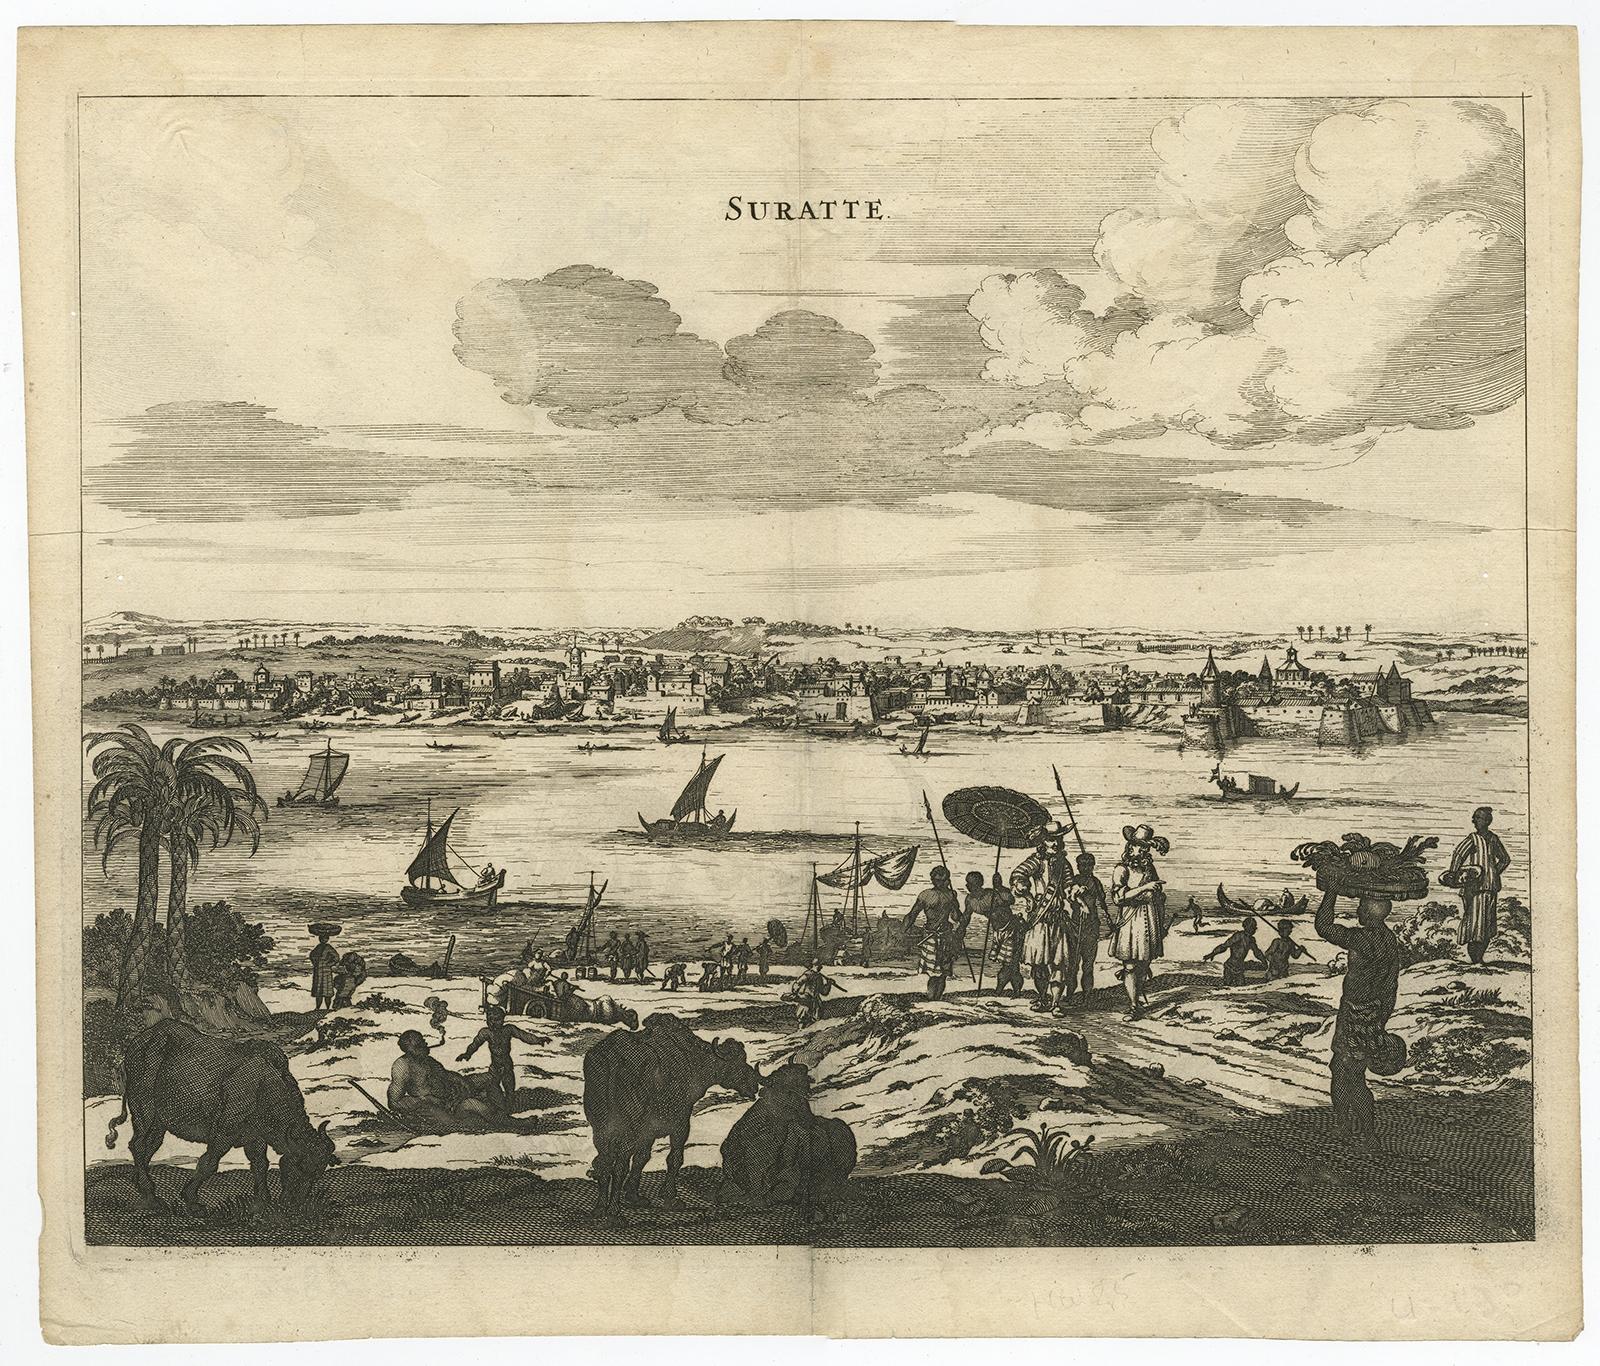 Antique print, titled: 'Suratte' 

View of the Indian city of Suratte (Surat) showing a panoramic view of the city with figures, animals and a river with boats in the foreground.

This original engraving originates from the 1672 German edition